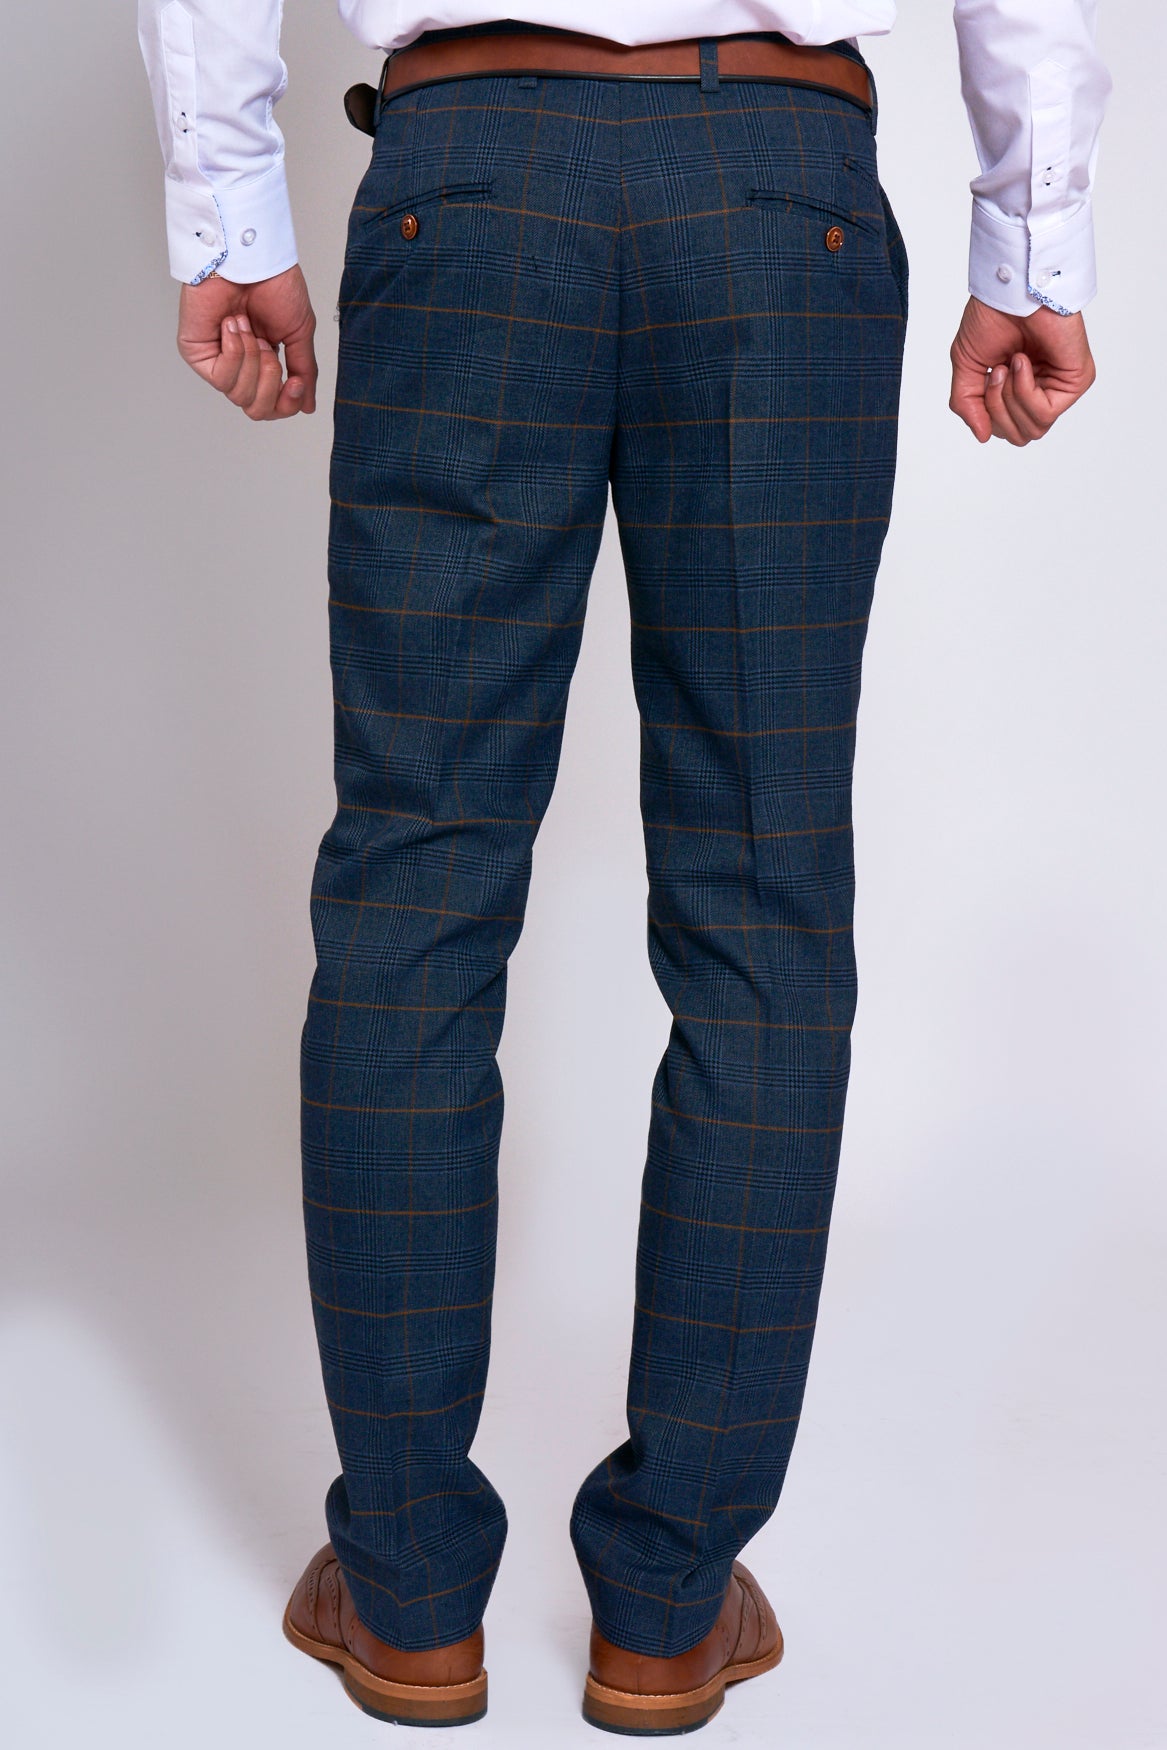 SIZES AVAILABLE IN STORE - Marc Darcy Jenson Marine Trouser